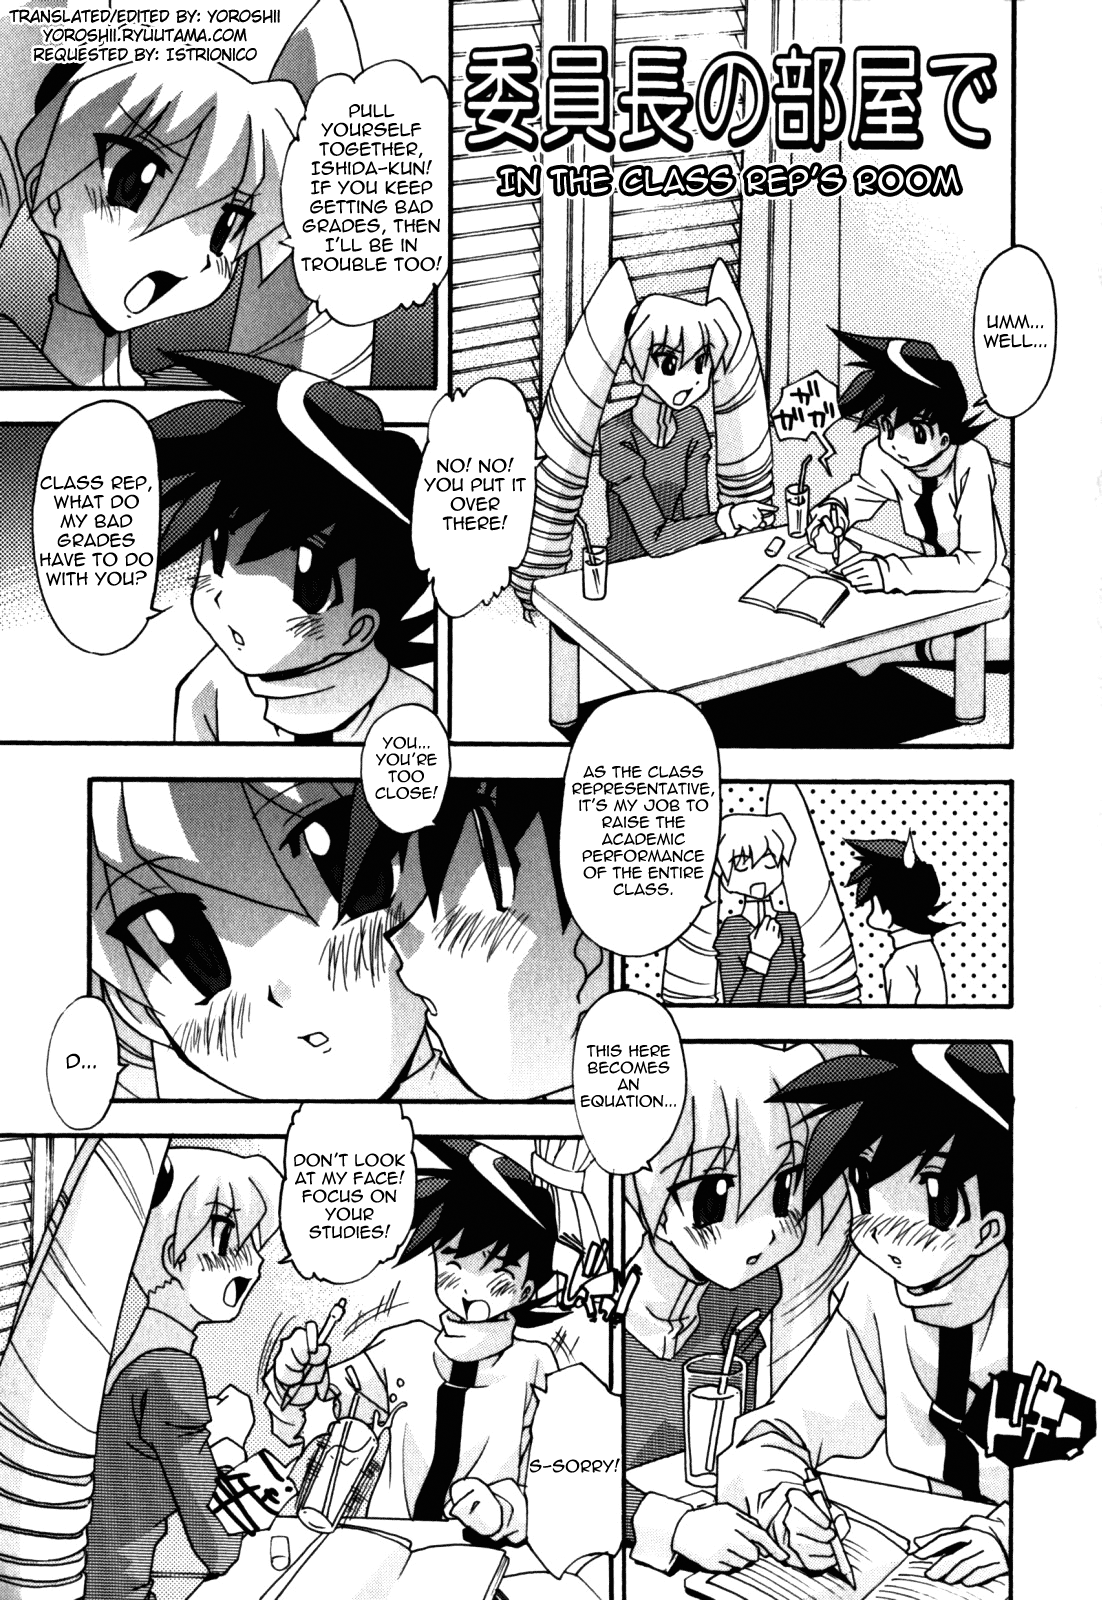 Sex And The Sister Vol.1 Chapter 10: In The Class Rep's Room - Picture 1